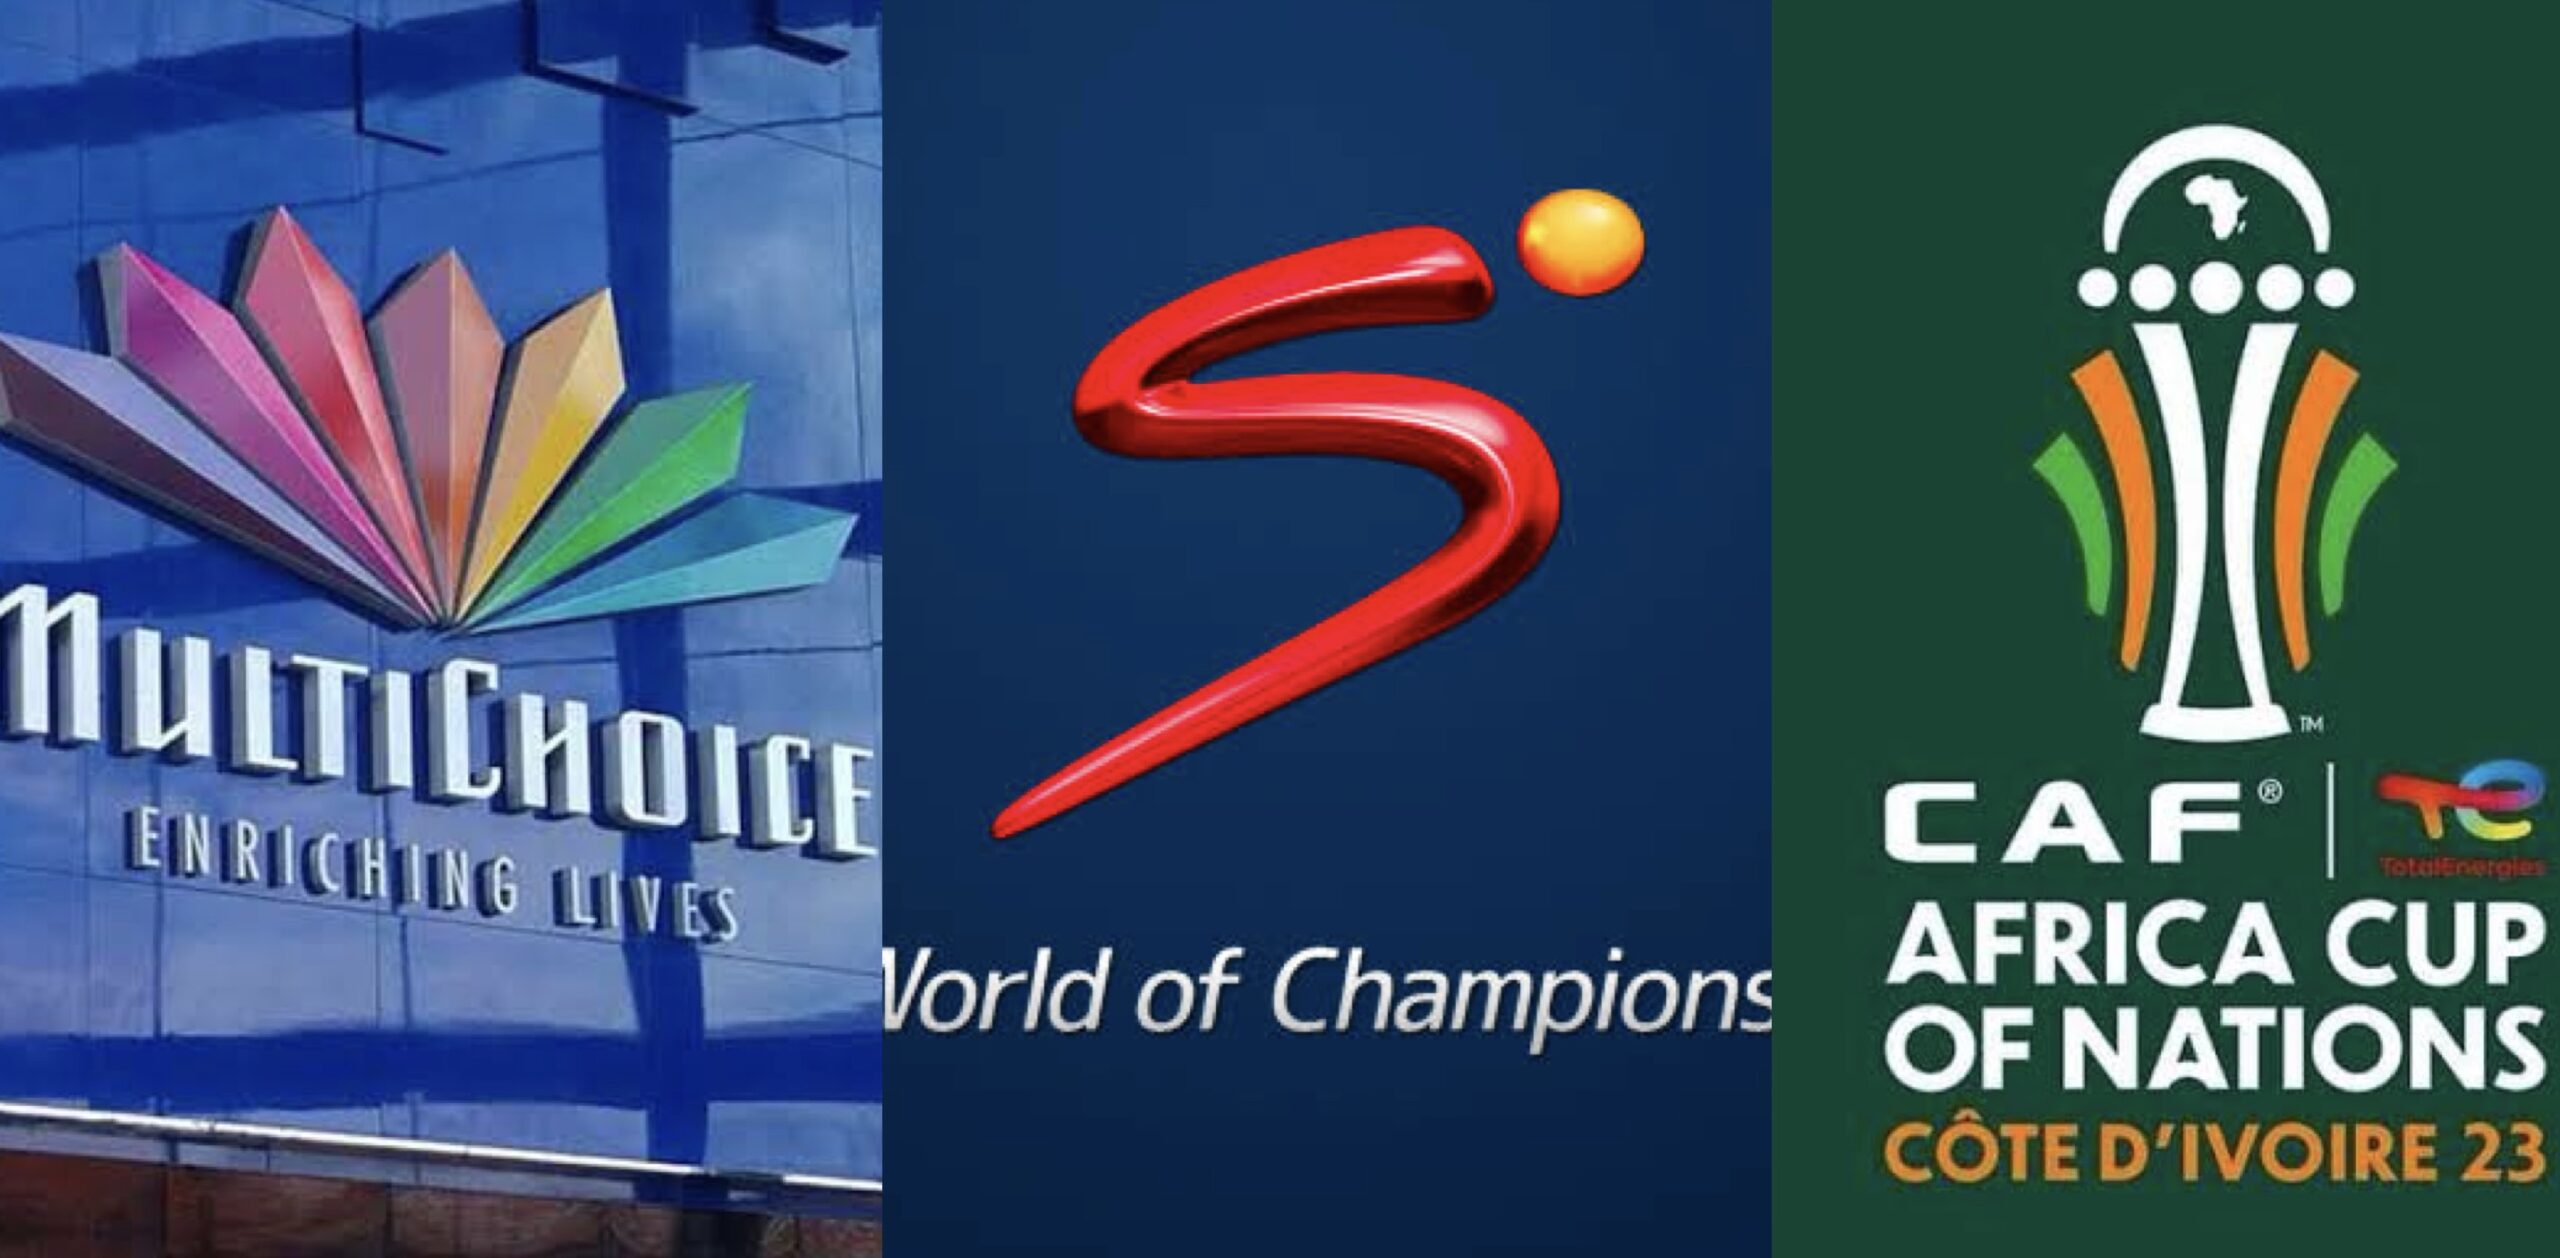 The pressure pays off as Supersport makes a U-turn and secures the 2023 AFCON rights